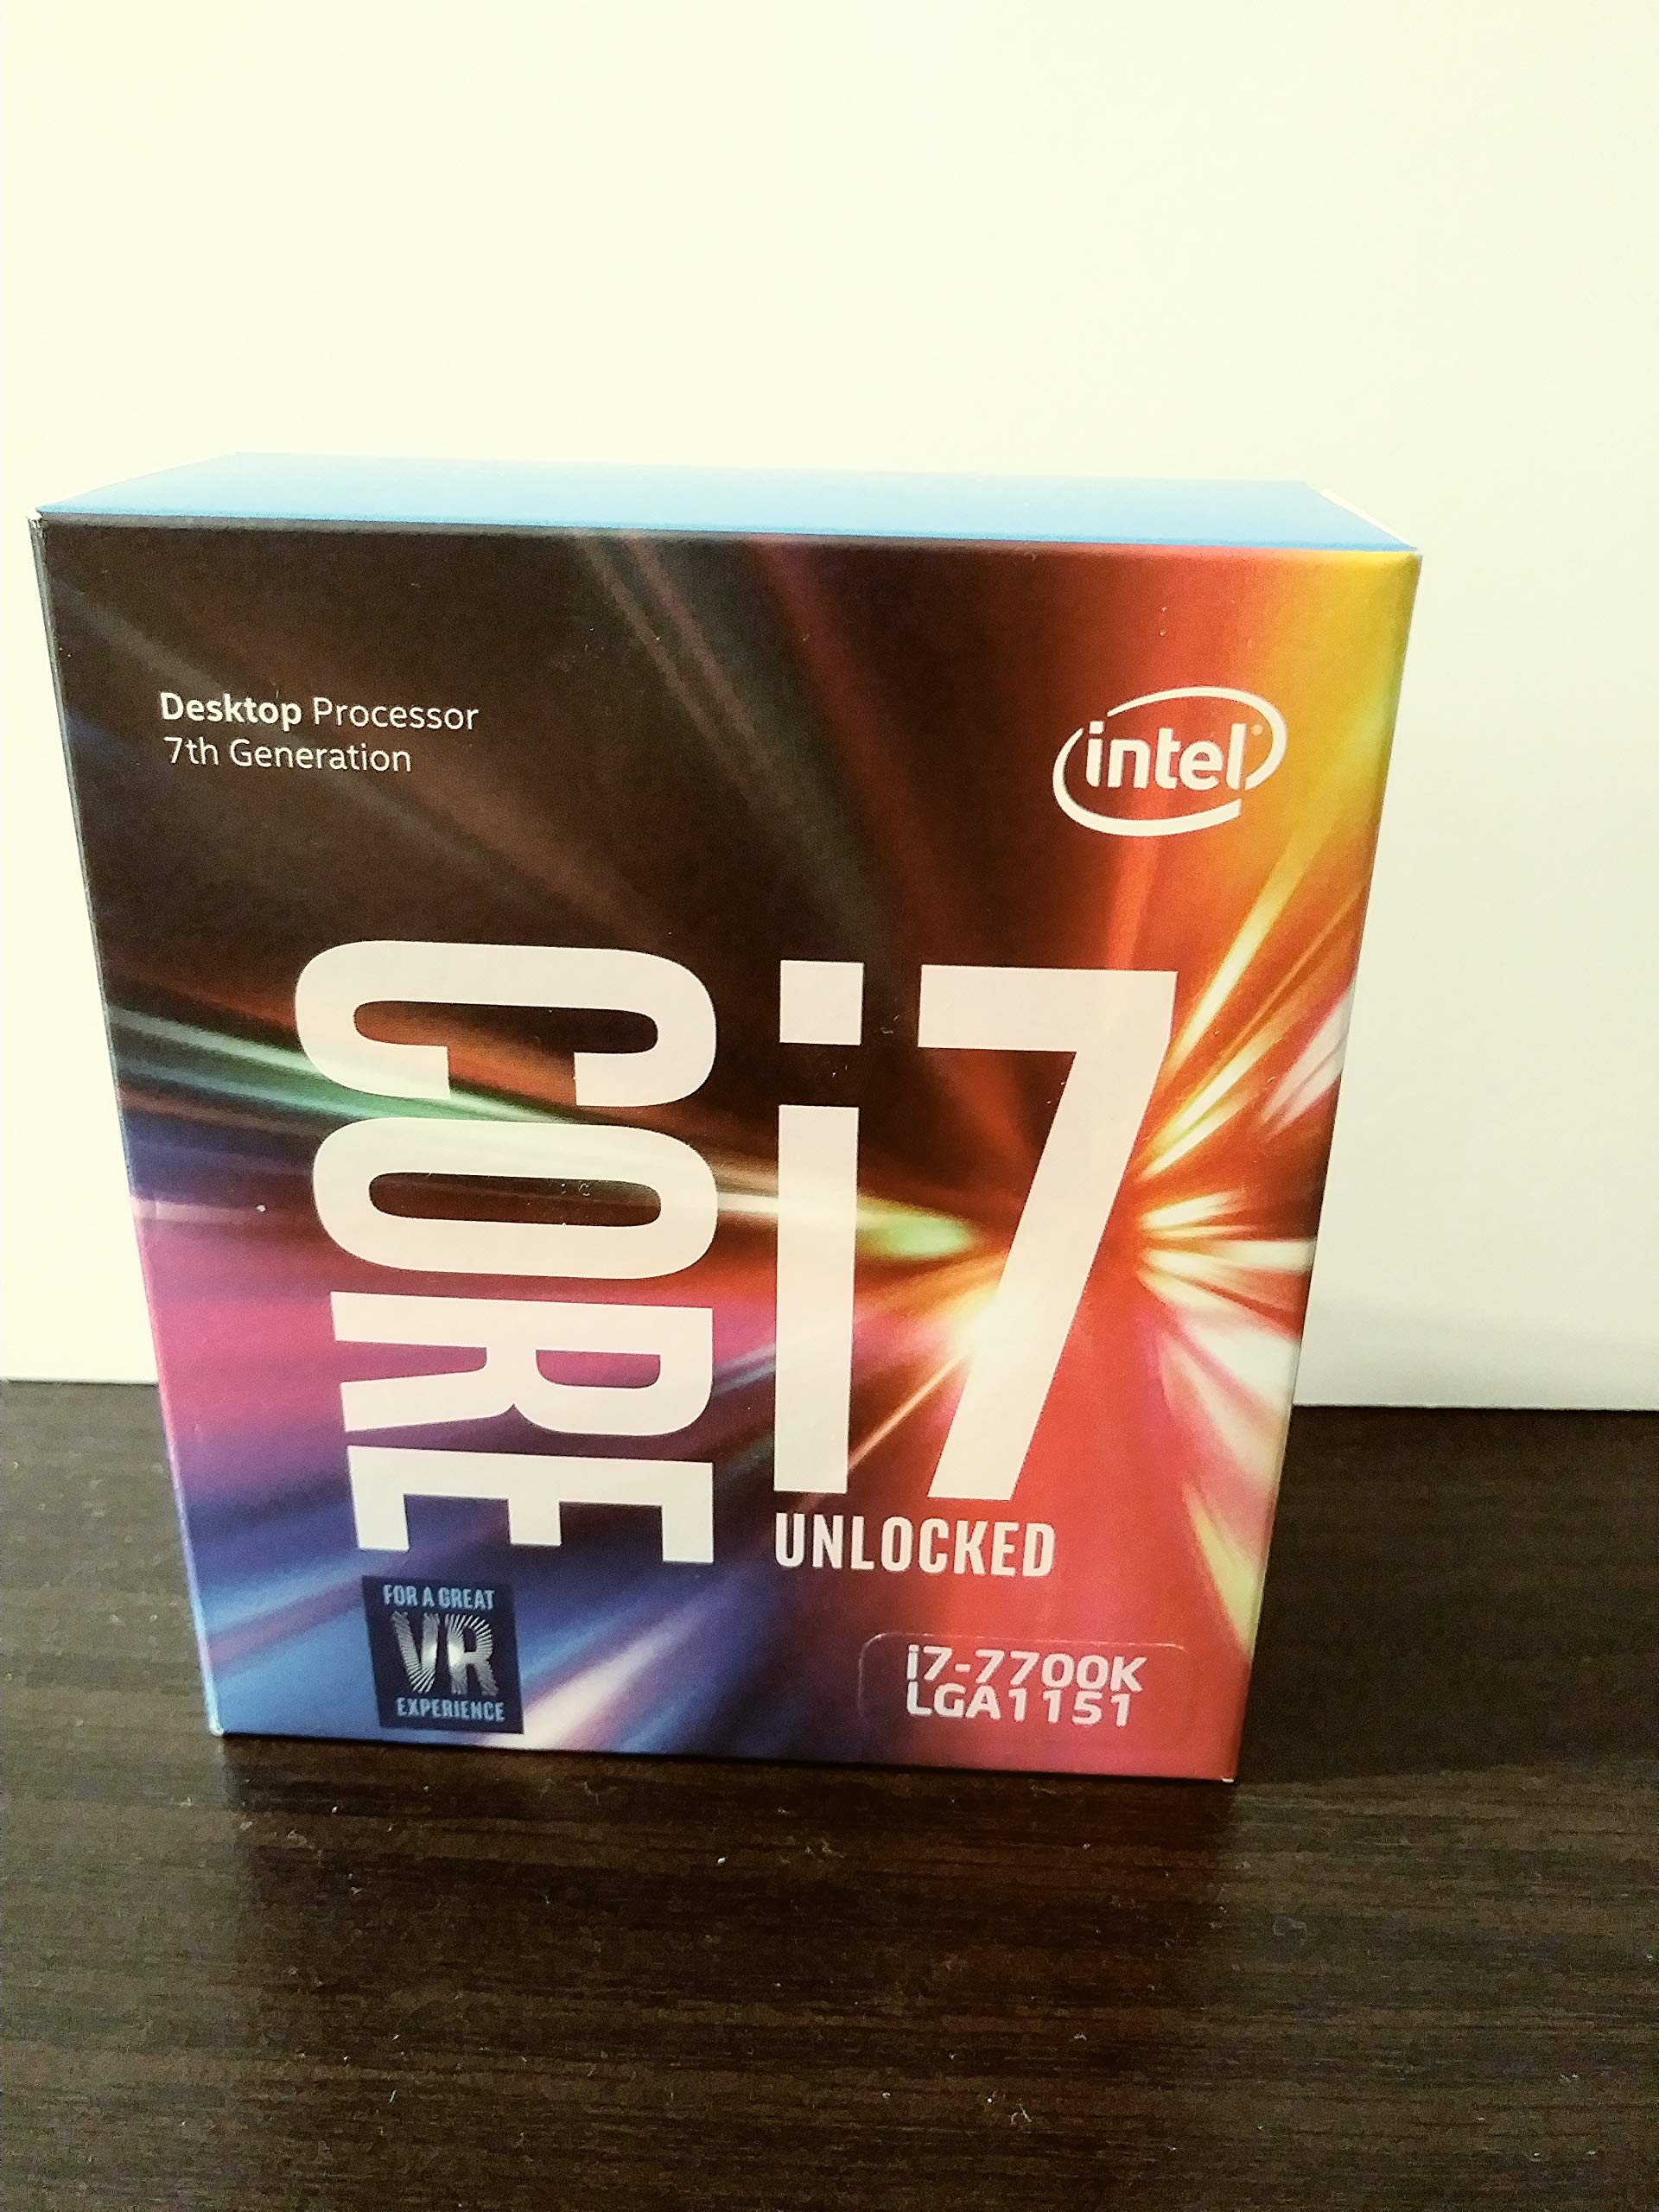 Intel Core i7-7700K Unlocked Processor 8M Cache, up to 4.50 GHz, Quad-Core Kaby Lake